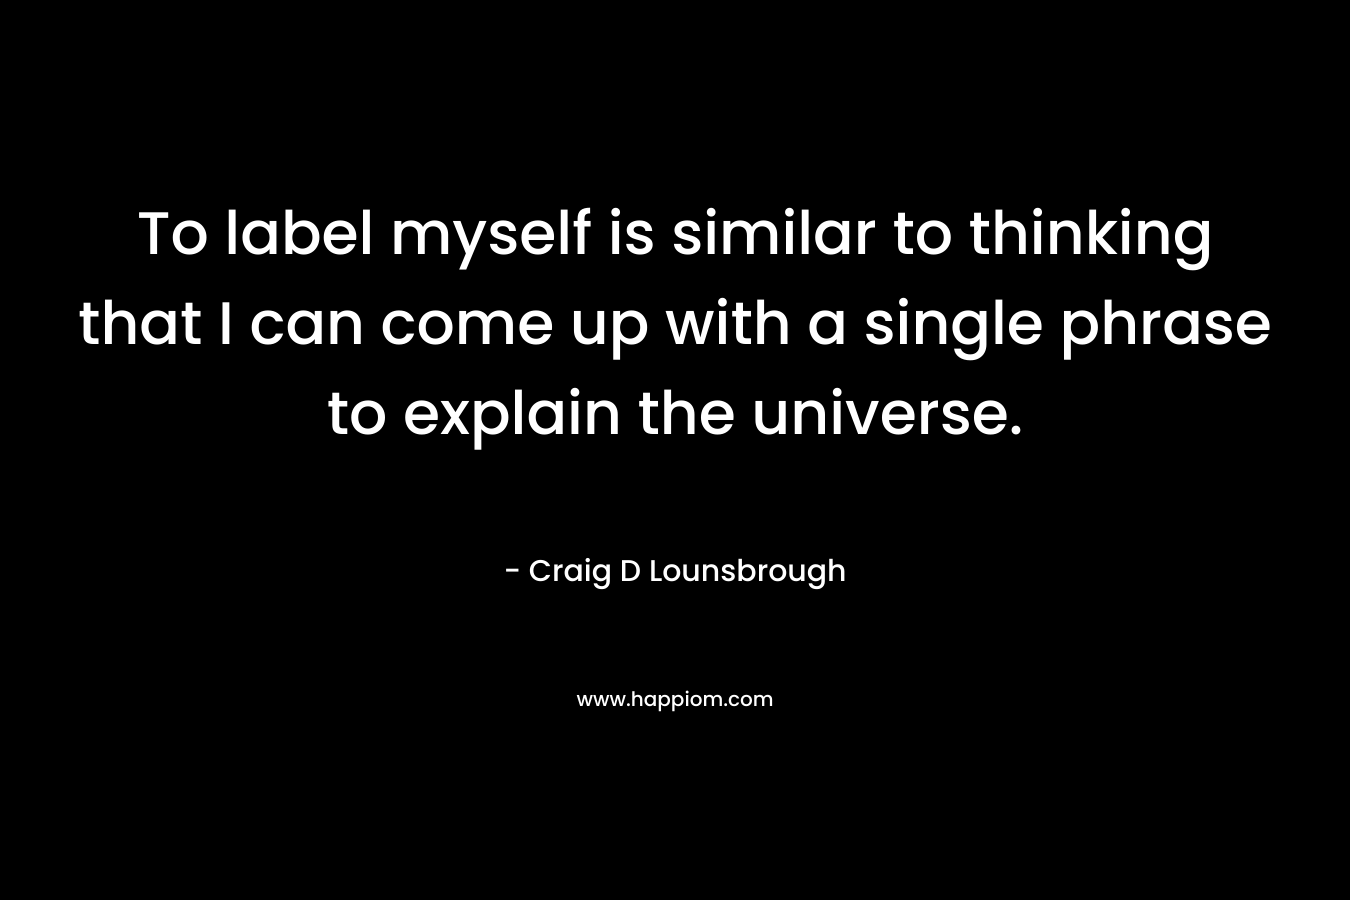 To label myself is similar to thinking that I can come up with a single phrase to explain the universe.